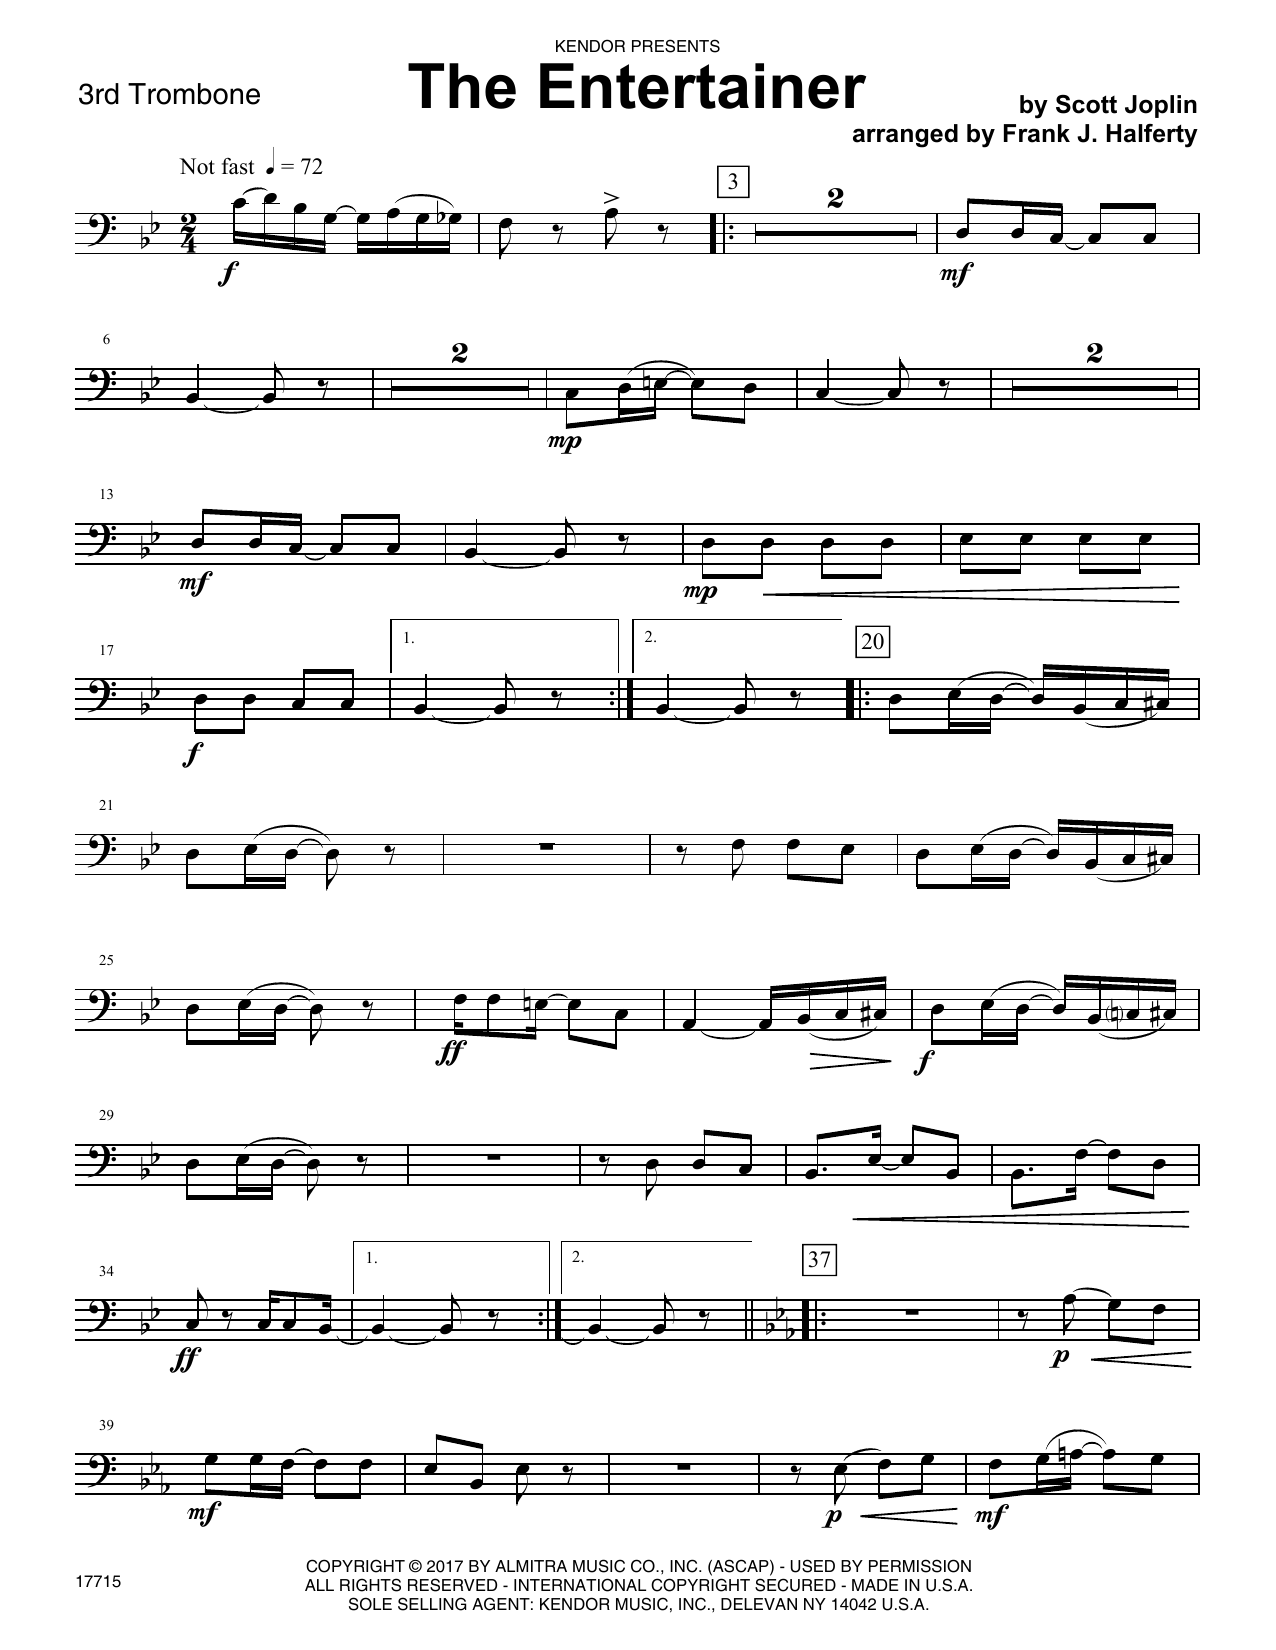 Frank J. Halferty The Entertainer - 3rd Trombone sheet music notes and chords. Download Printable PDF.